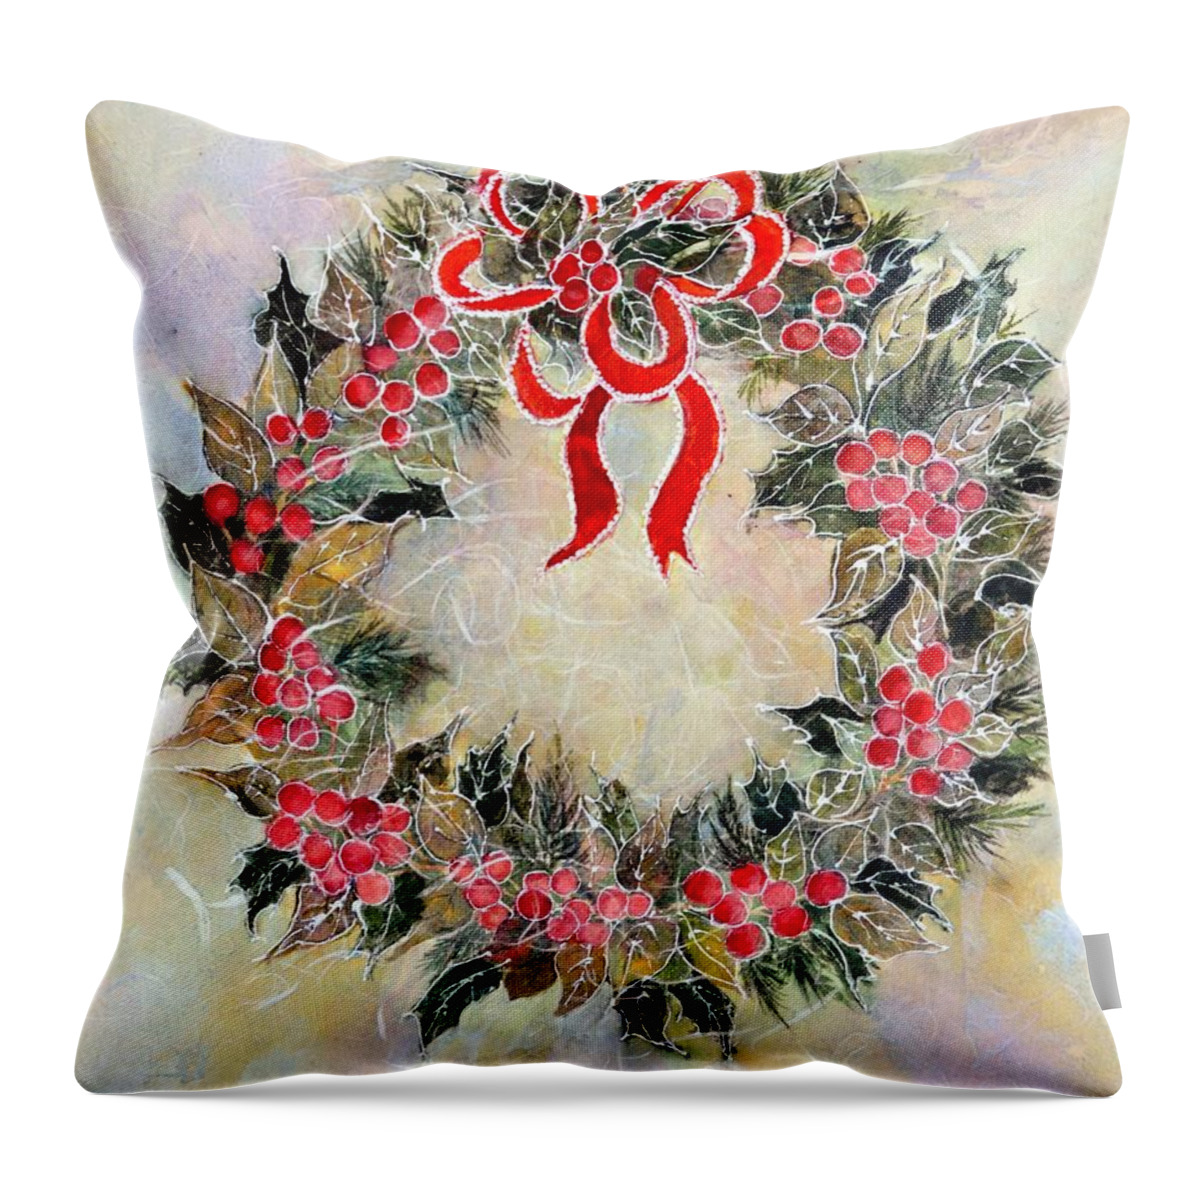 Christmas Print Throw Pillow featuring the painting Christmas Wreath by Pamela Lee